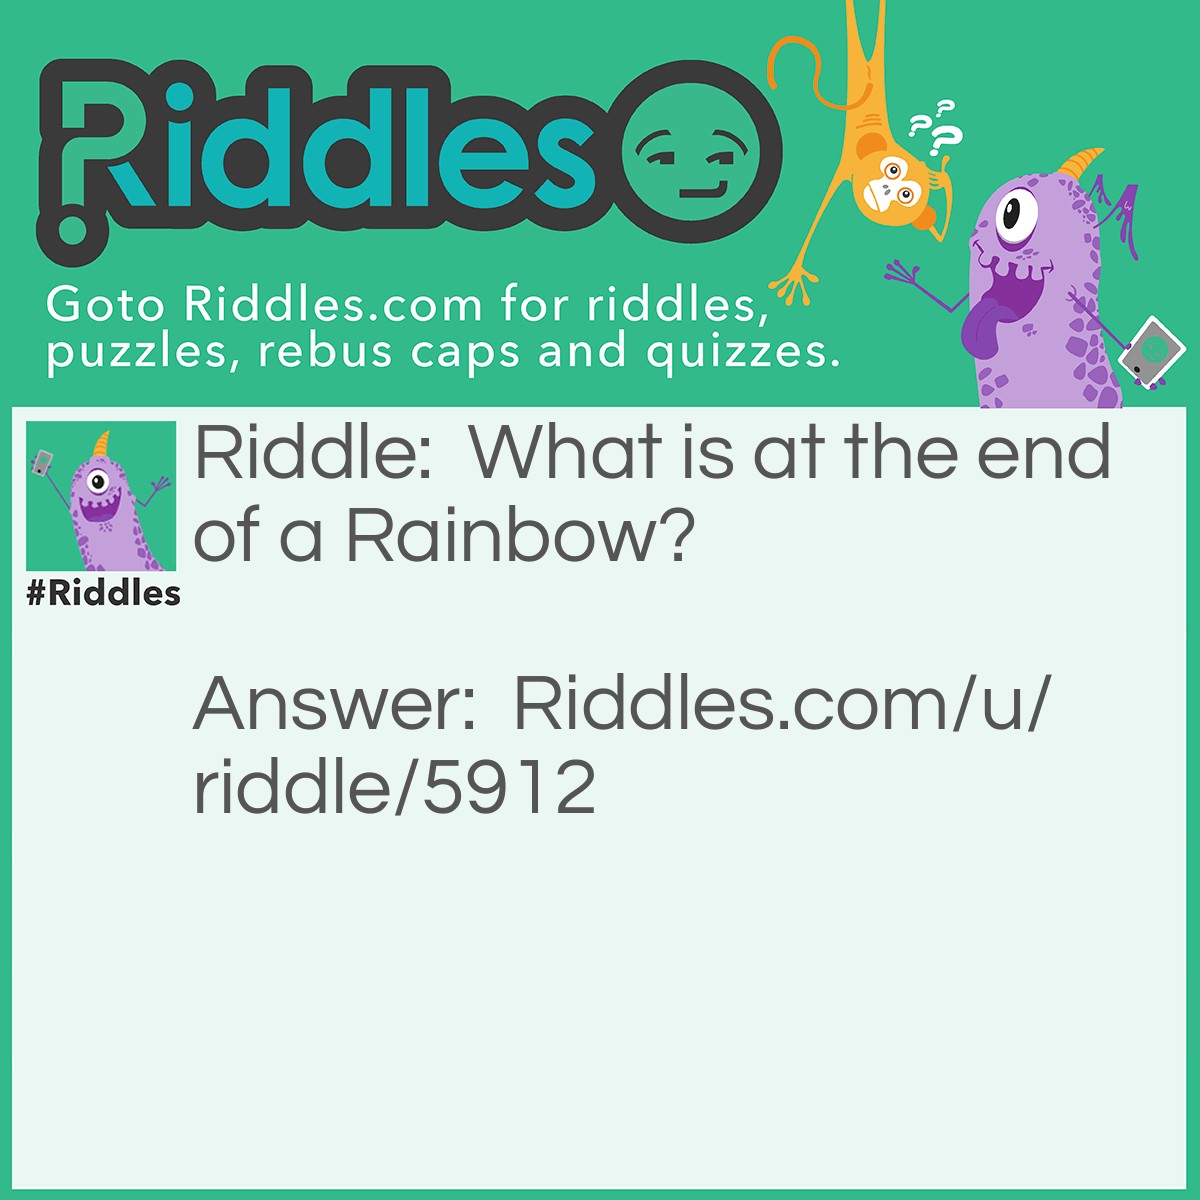 Riddle: What is at the end of a Rainbow? Answer: The letter W.